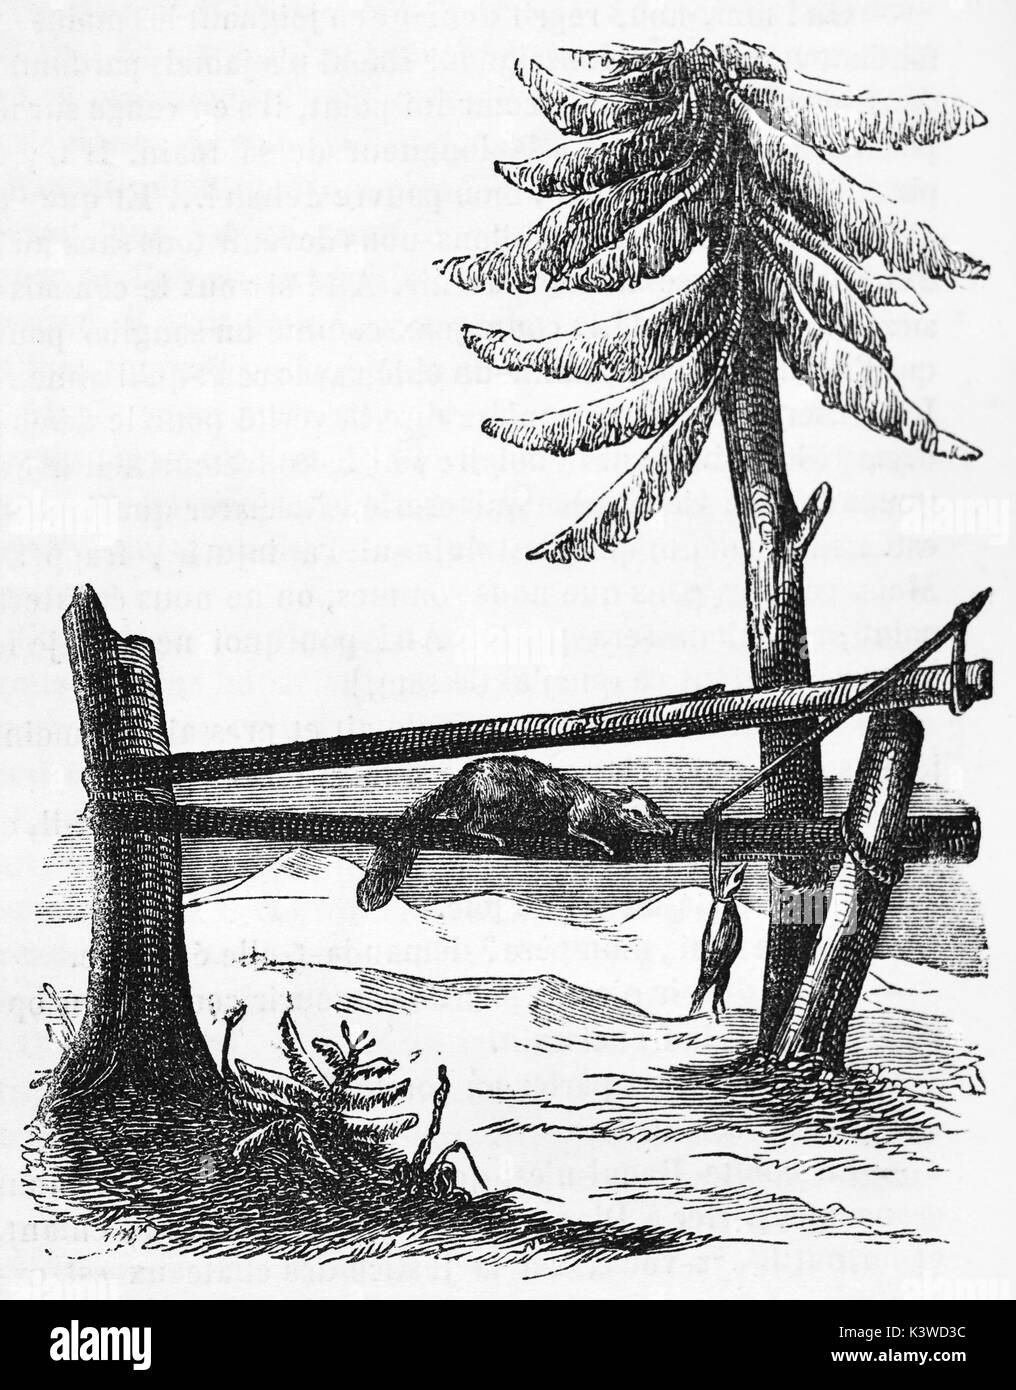 Otter caught in hunter's trap being harassed by hunting dogs. Old 19th  century engraved illustration, El Mundo Ilustrado 1881 Stock Photo - Alamy